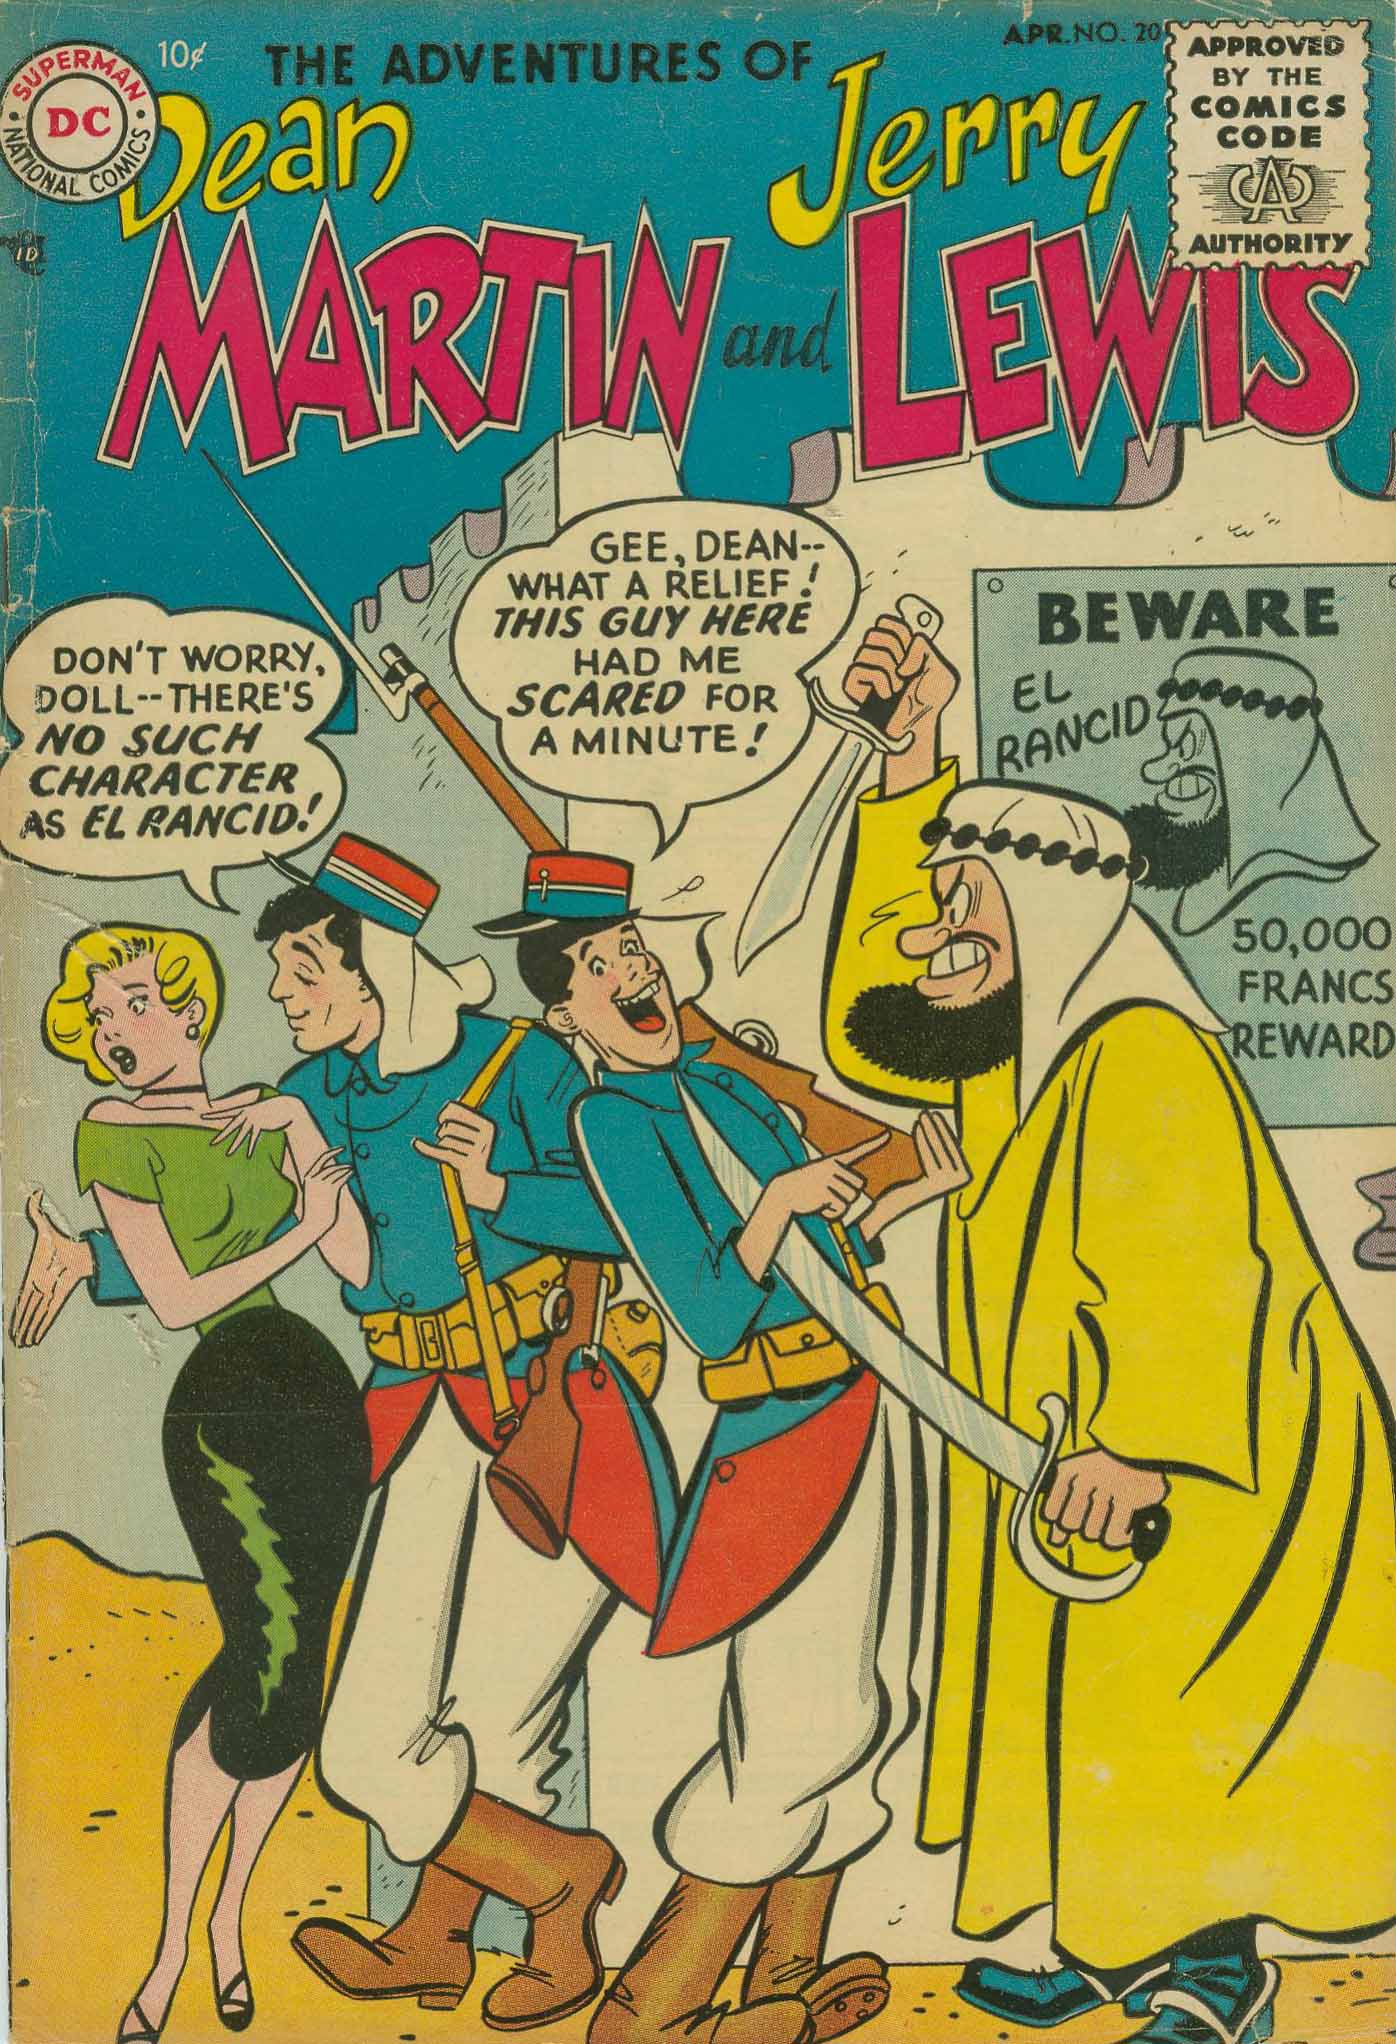 Read online The Adventures of Dean Martin and Jerry Lewis comic -  Issue #20 - 1